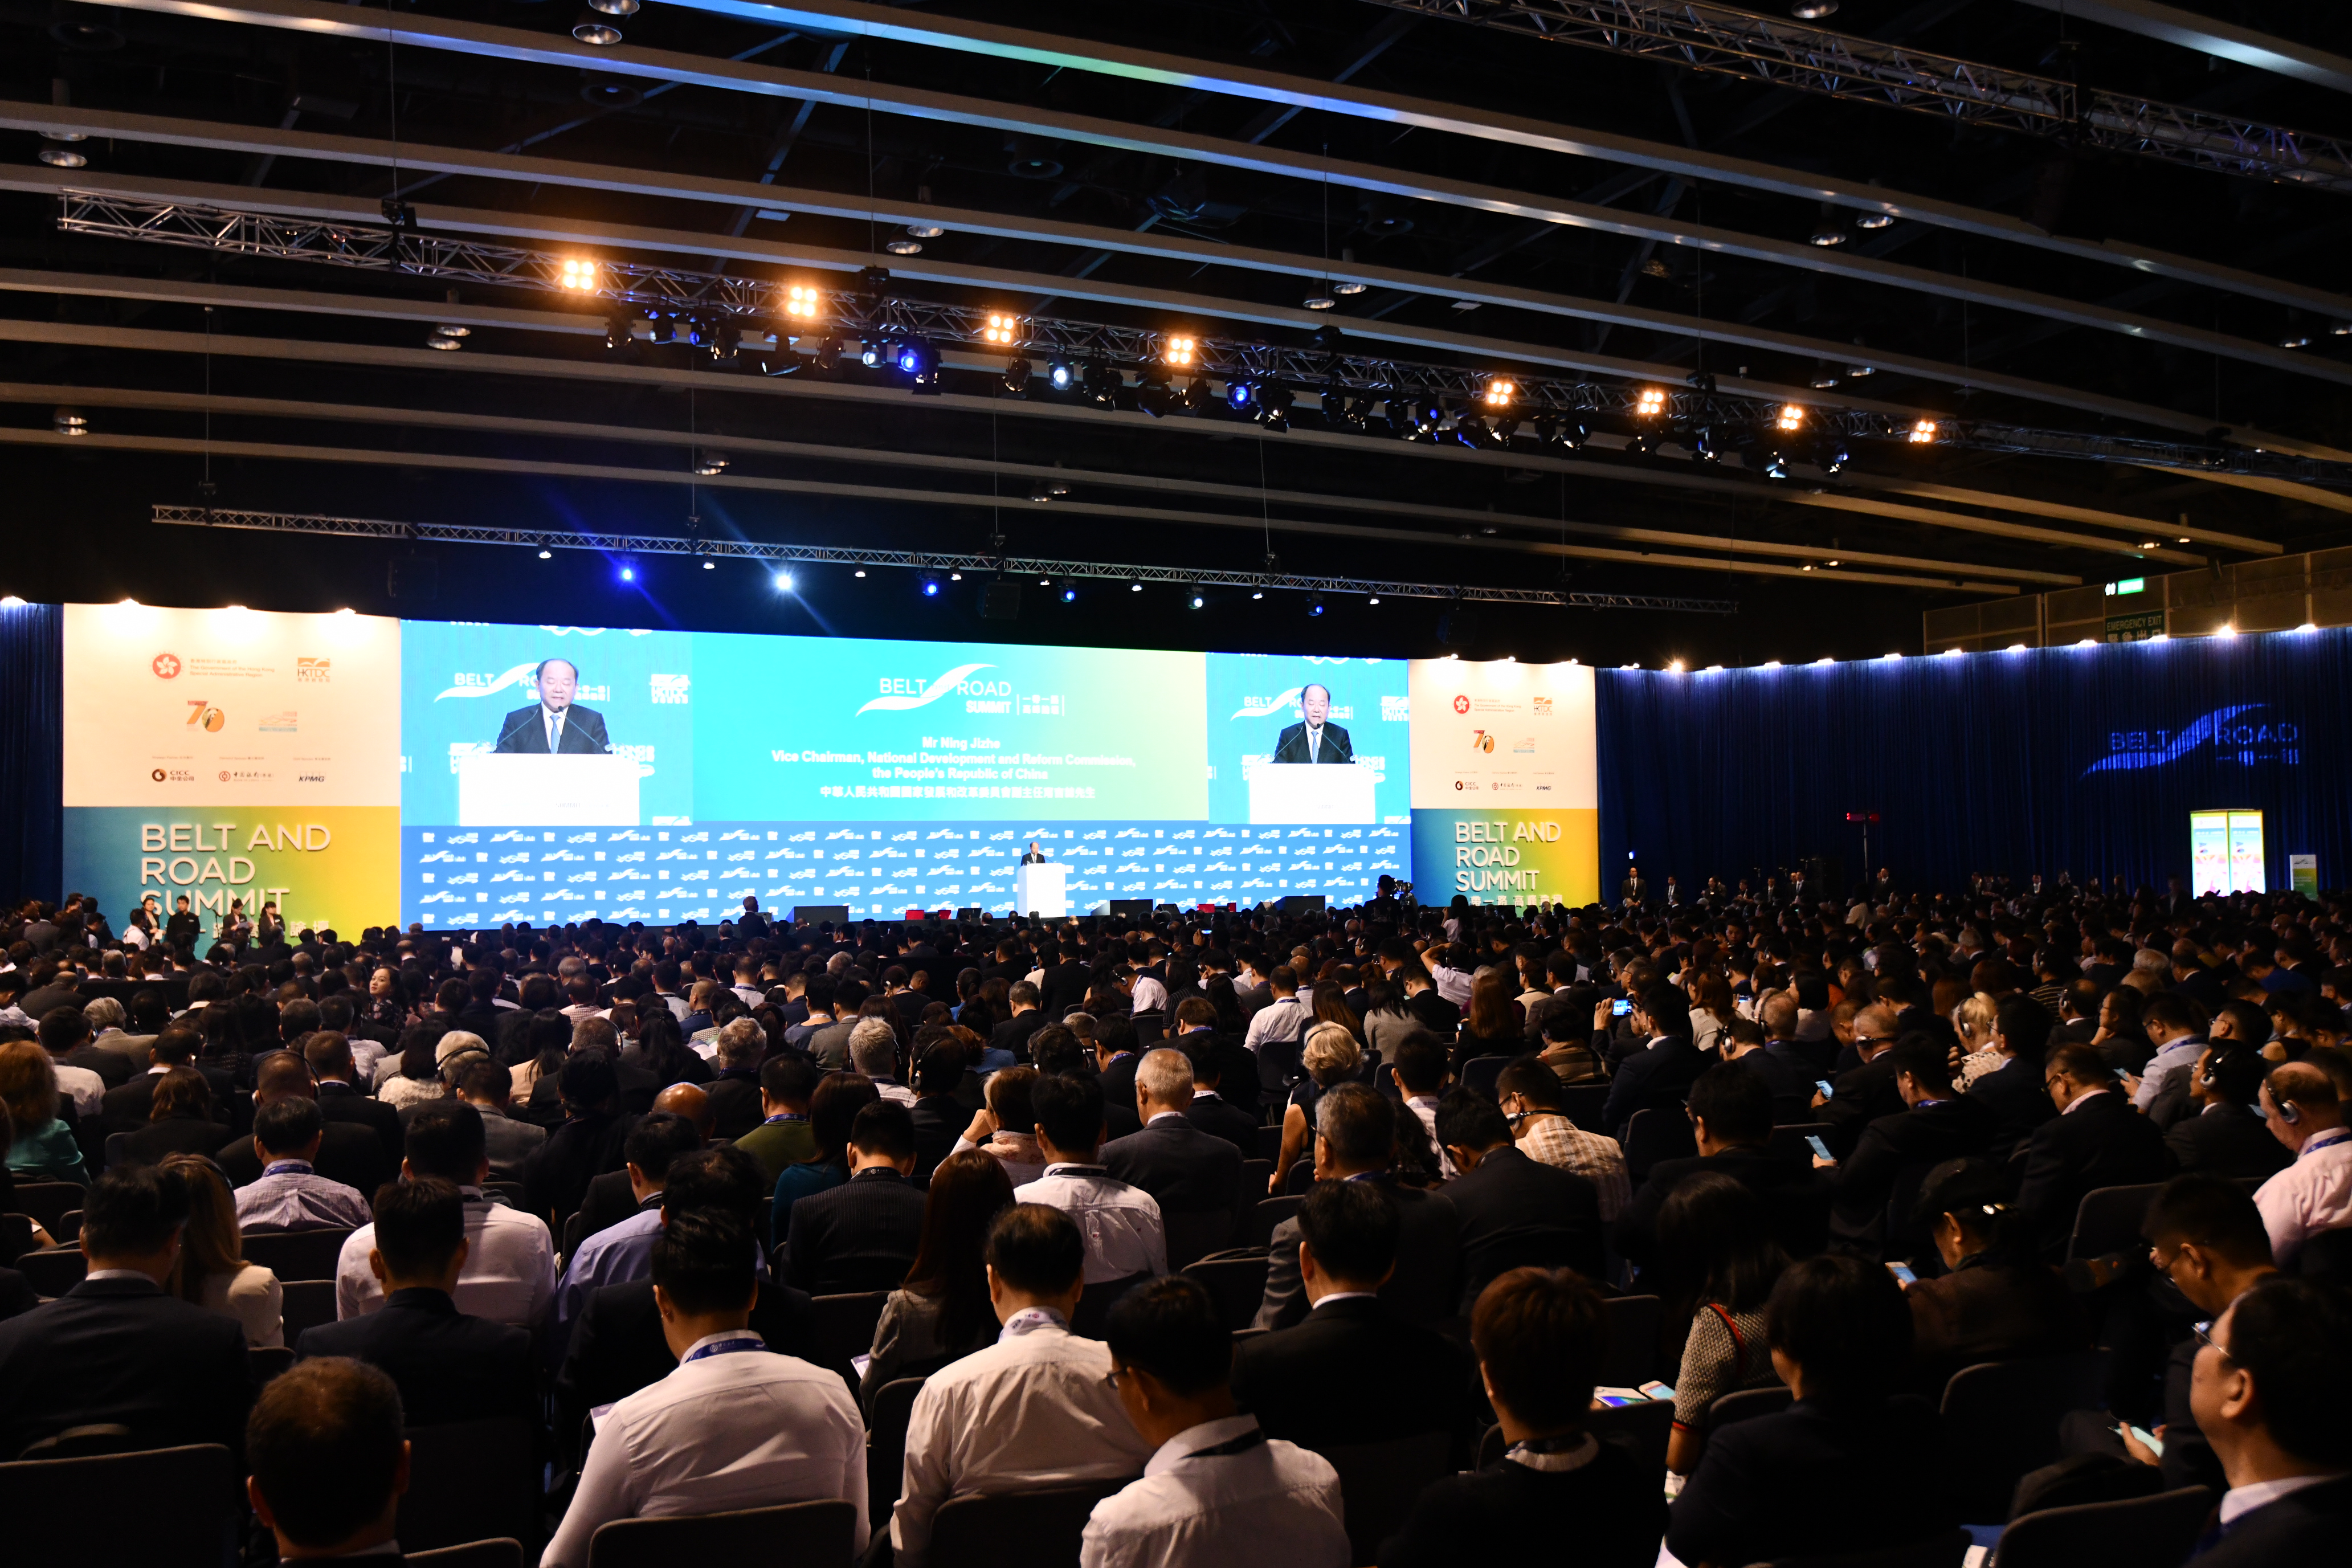 The fourth Belt and Road Summit, co-organised by the Hong Kong Special Administrative Region Government and the HKTDC, was held on 11 and 12 September 2019 and welcomed some 5,000 political and business leaders from around the world, including more than 500 from the ASEAN region.